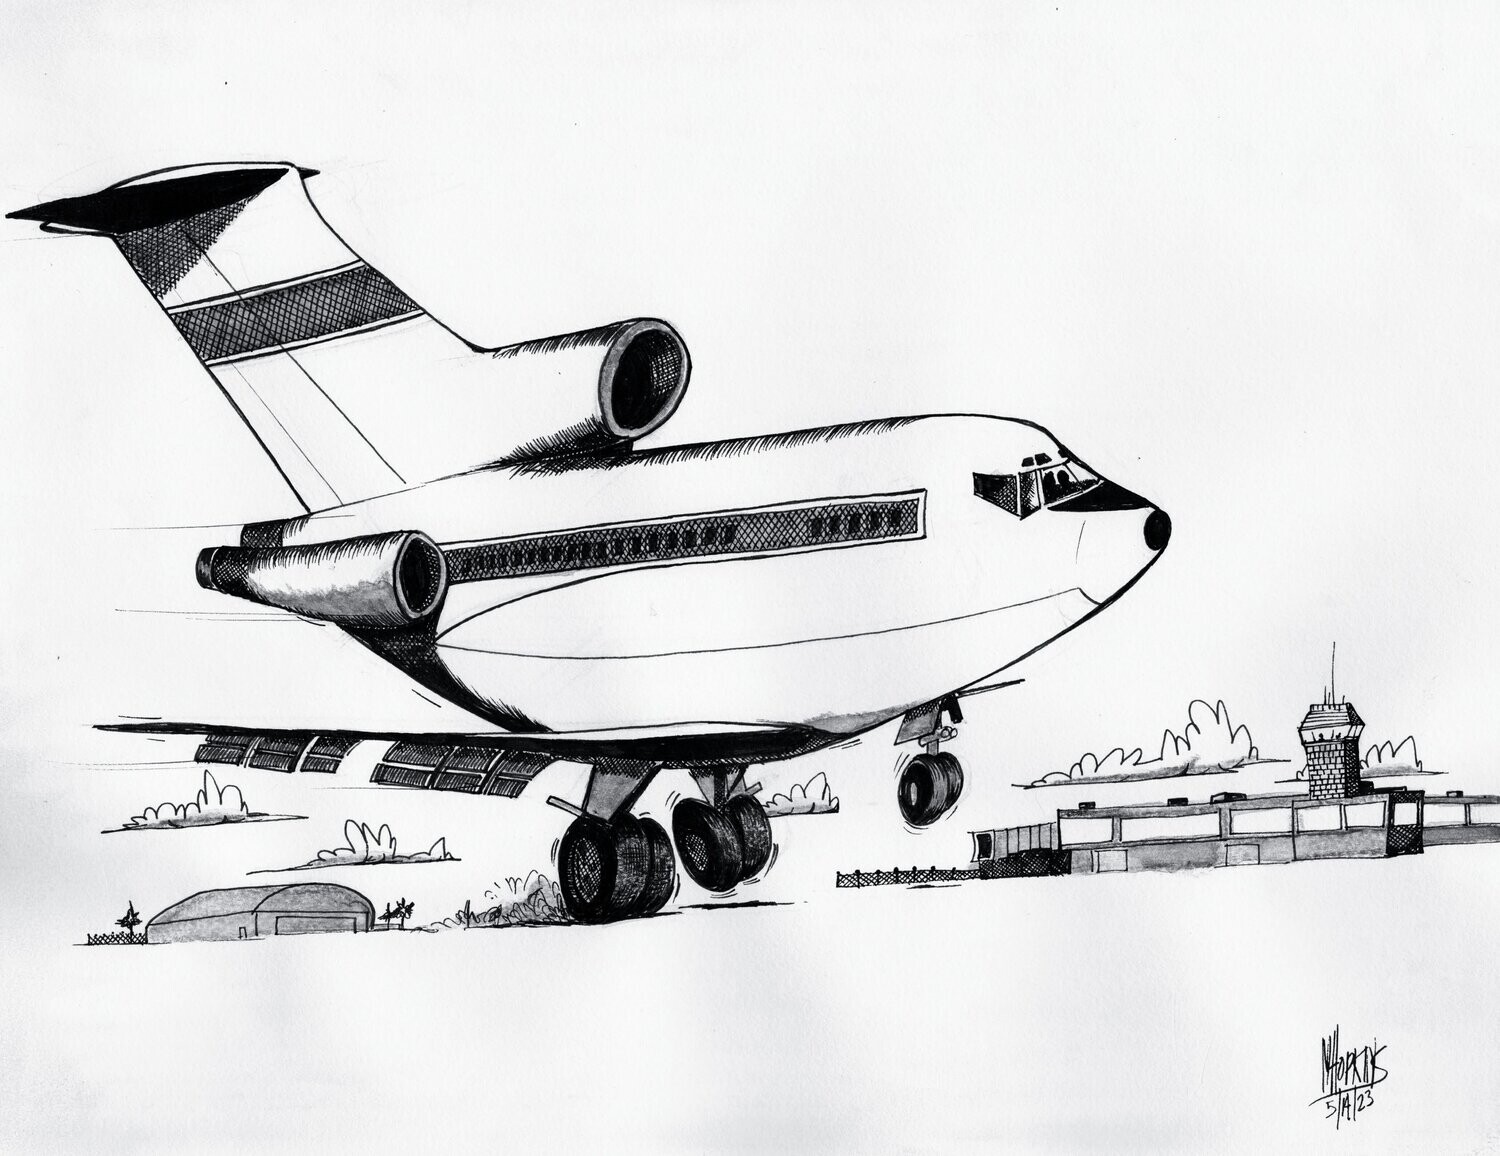 Boeing 727 - 11" x 14" and 8" x 10" Aviation Caricature Limited Edition Prints by Michael Hopkins